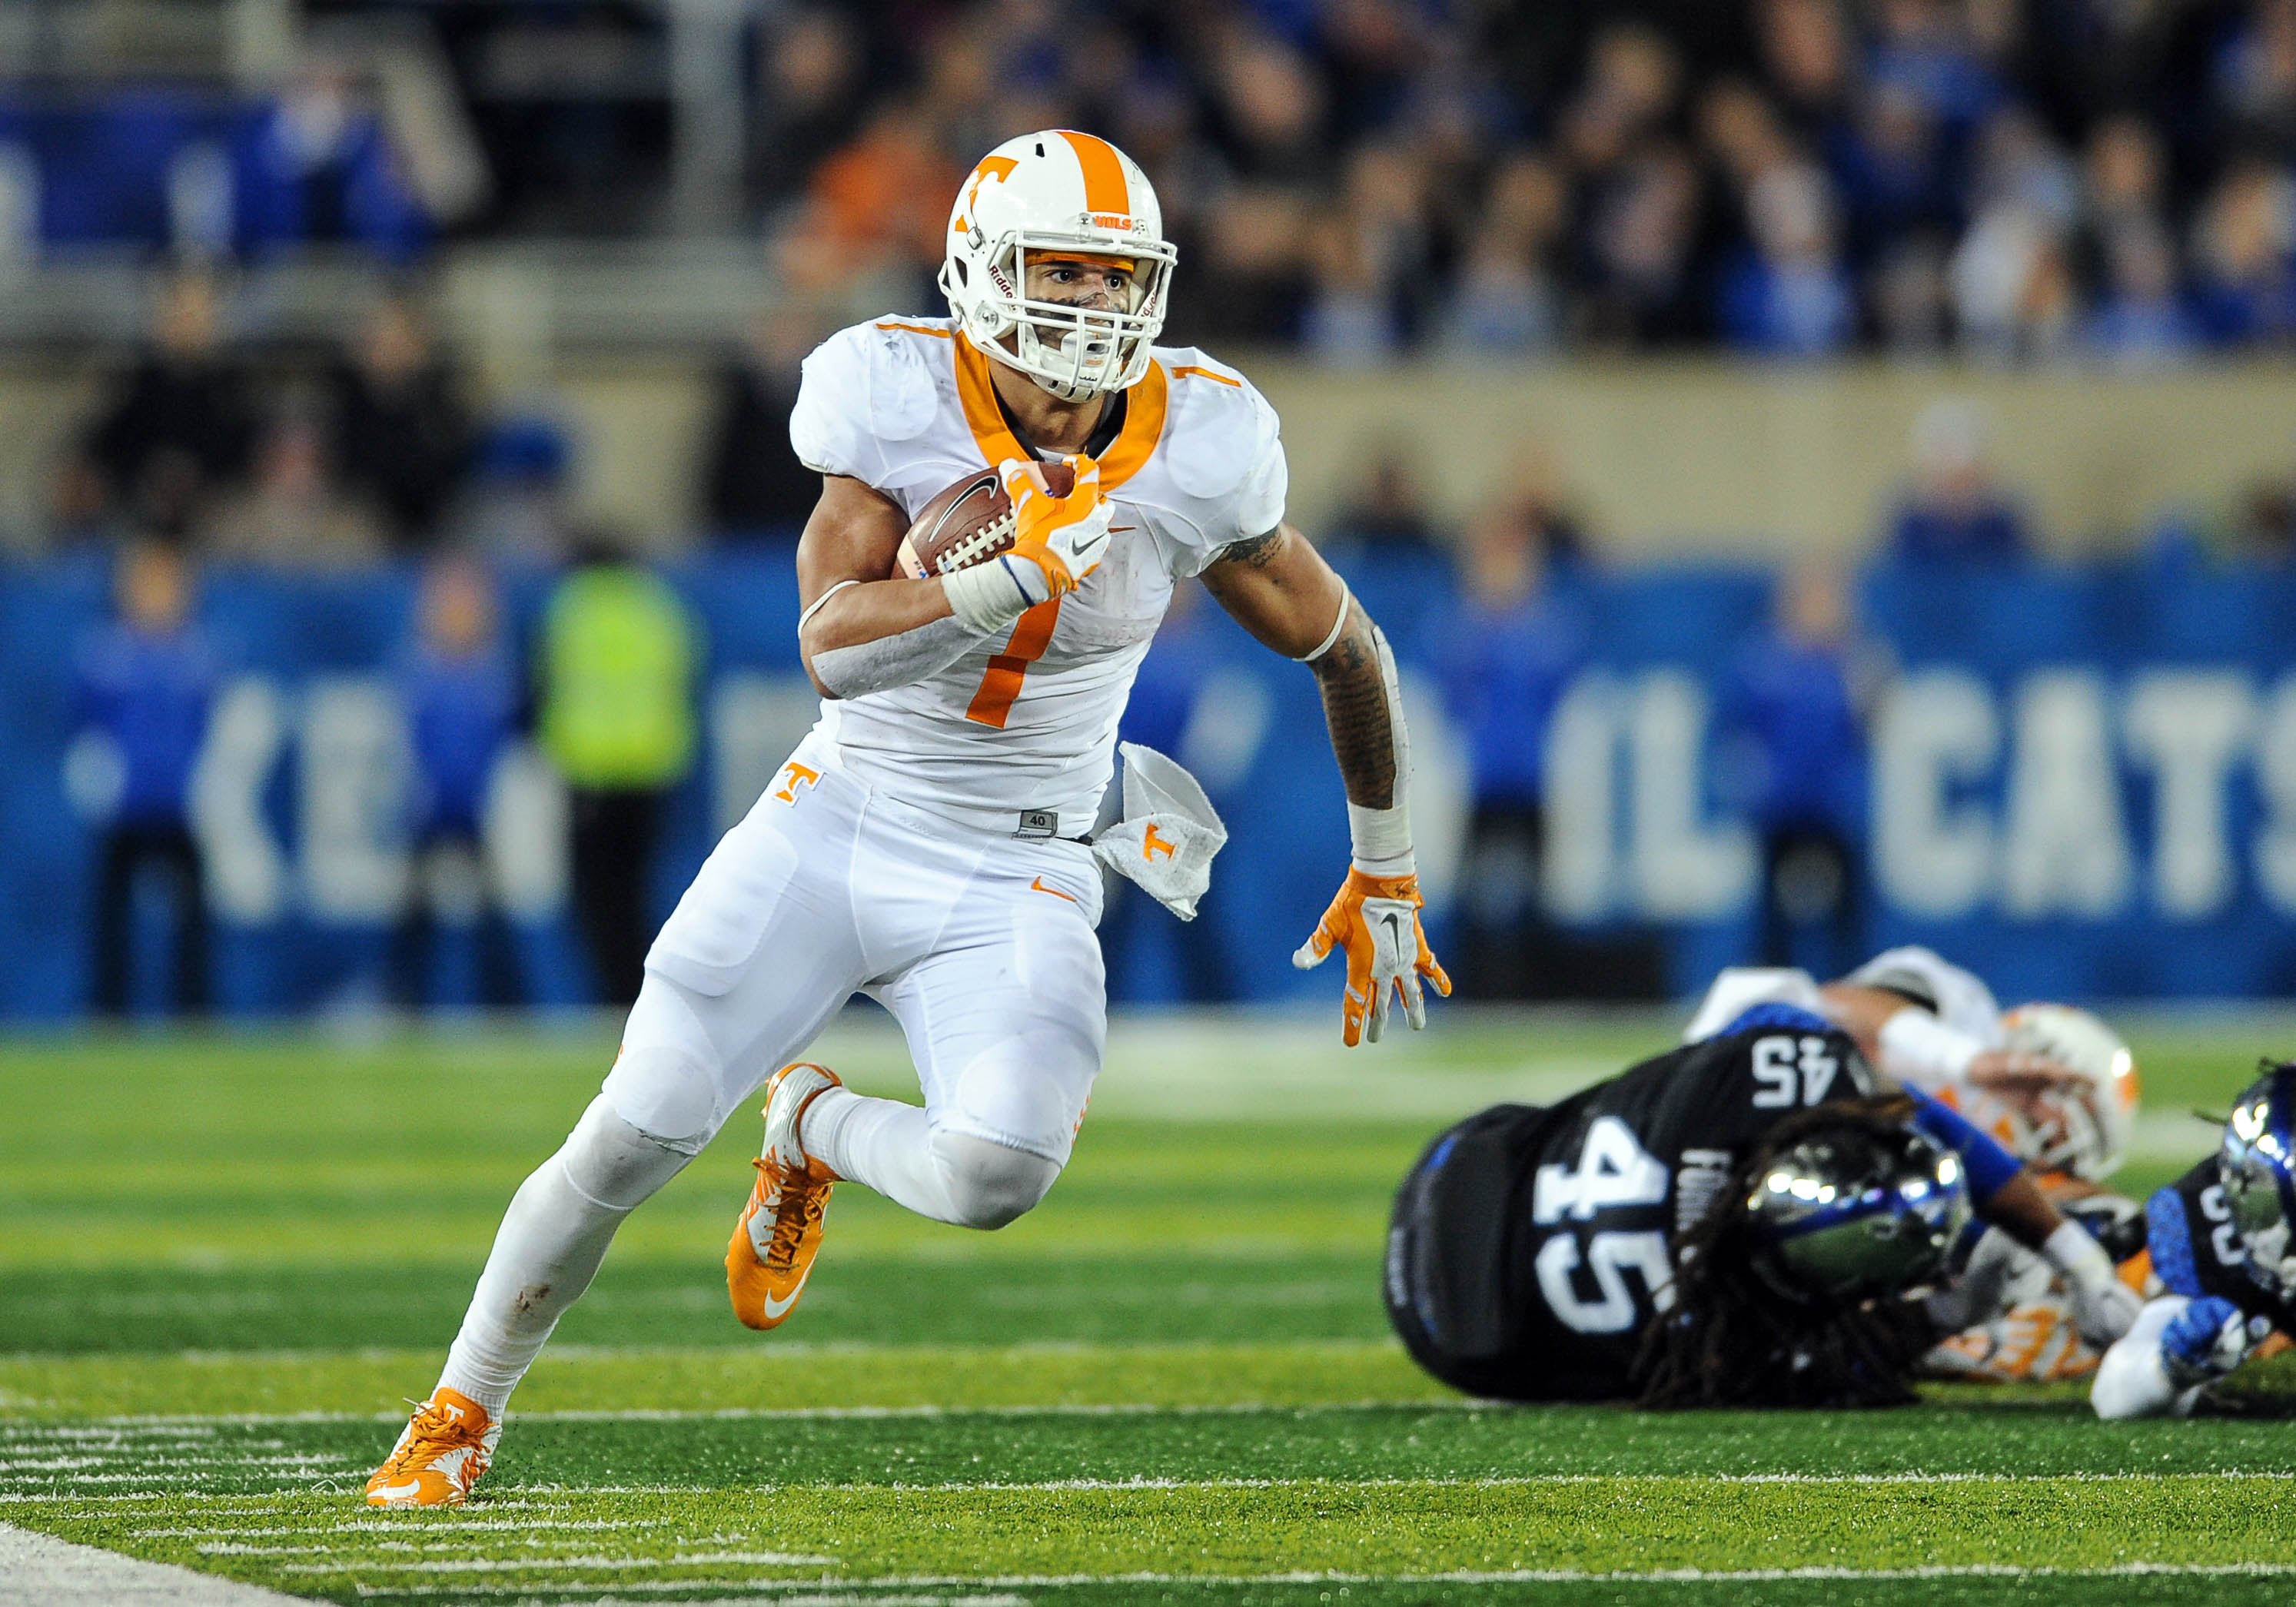 Oct 31, 2015; Lexington, KY, USA; Tennessee Volunteers running back Jalen Hurd (1) runs for a touchdown against the Kentucky Wildcats at Commonwealth Stadium. Mandatory Credit: Bryan Lynn-USA TODAY Sports